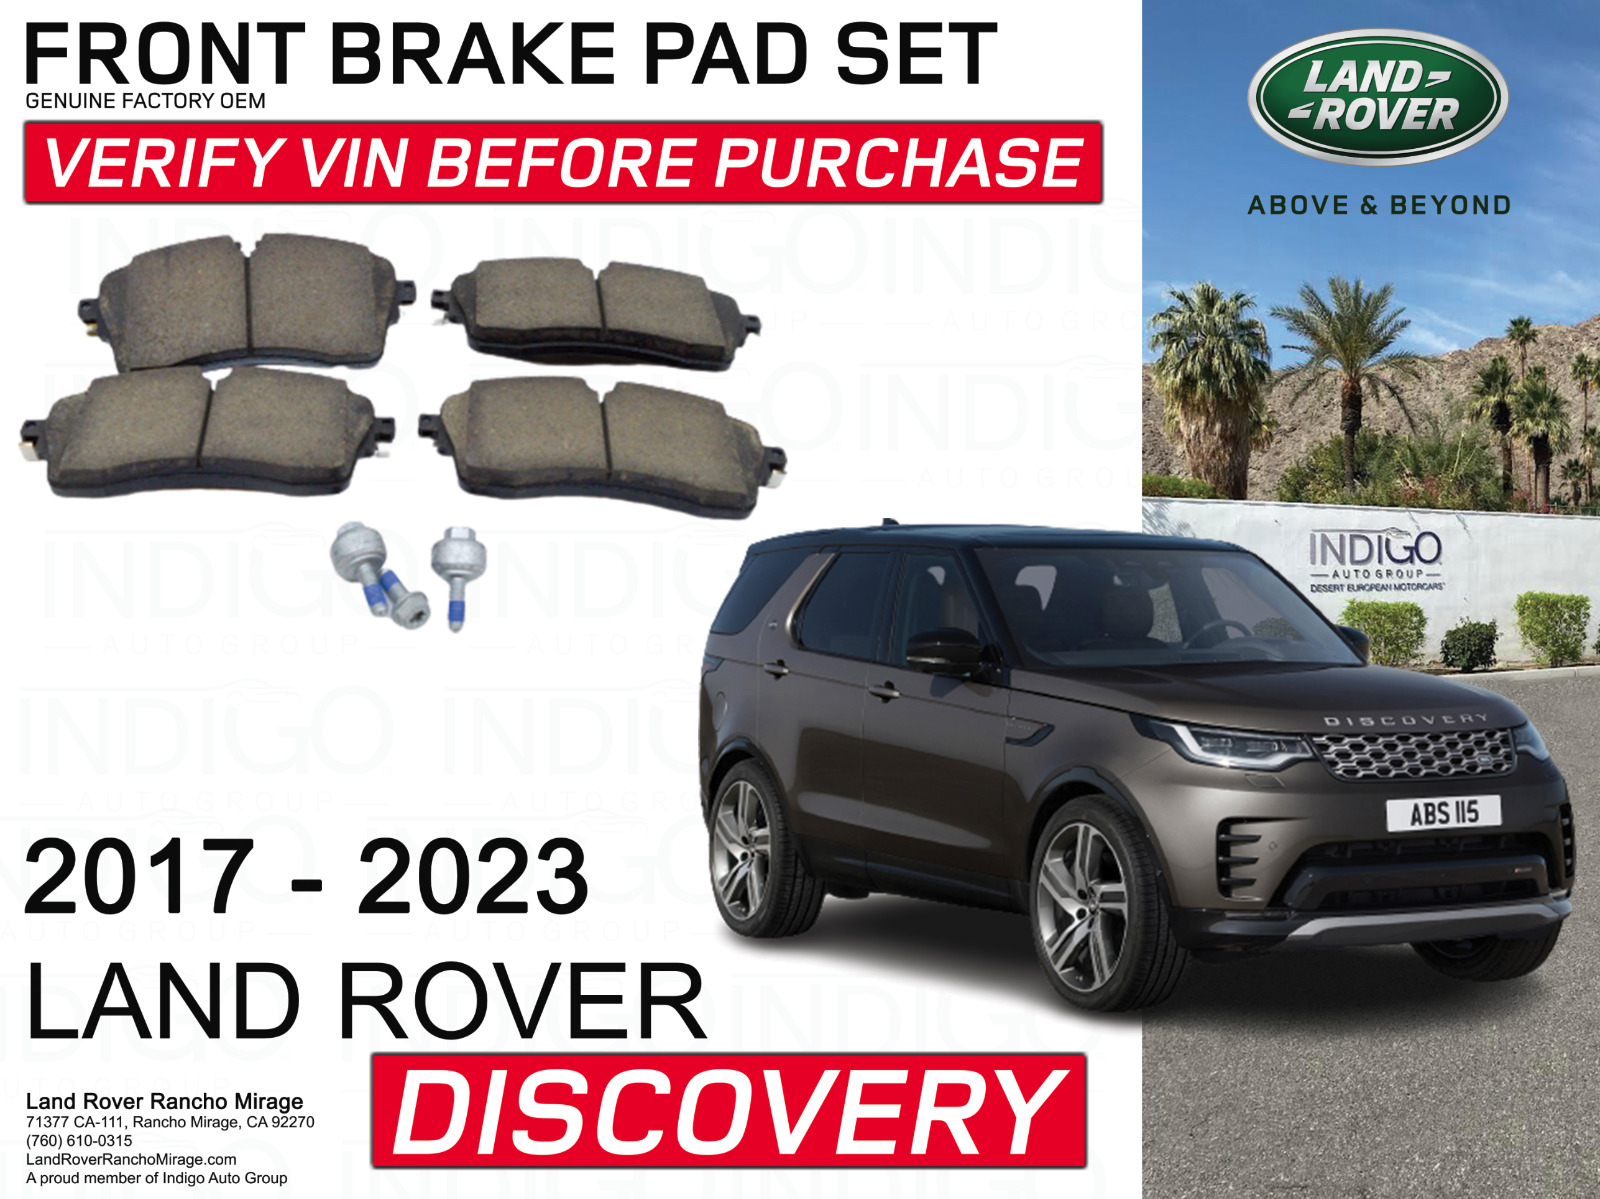 2017-2023 LAND ROVER DISCOVERY OEM FRONT Brake Pads  (VERIFY VIN)